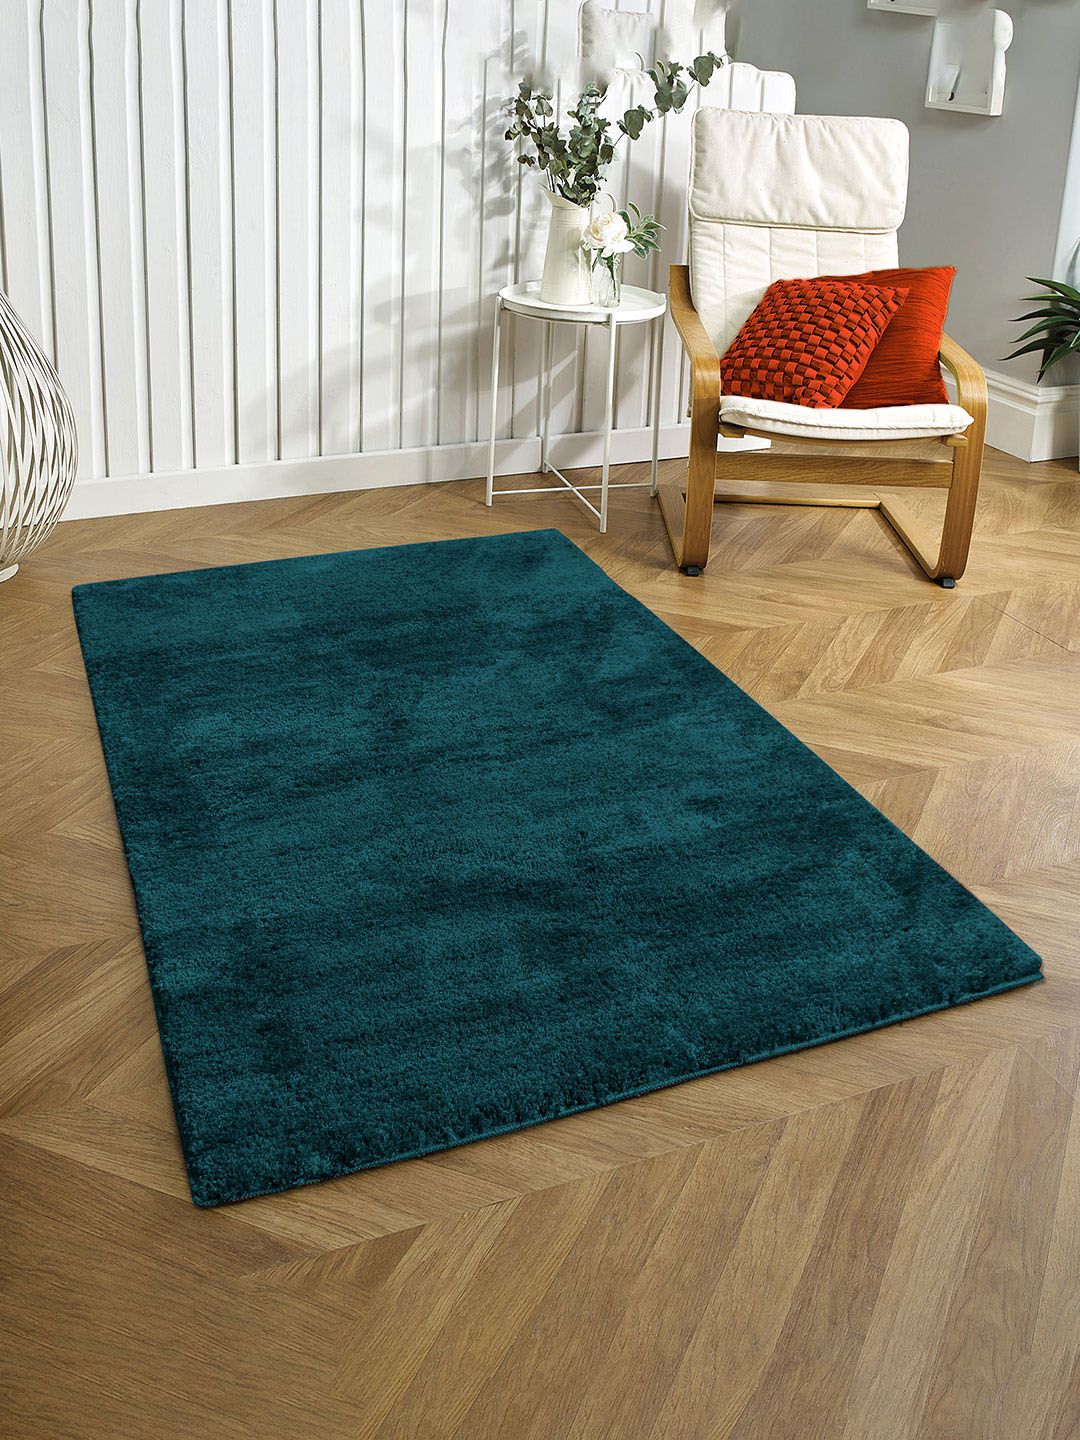 LUXEHOME INTERNATIONAL Teal Blue Solid Rectangular Anti-Skid Carpet Price in India